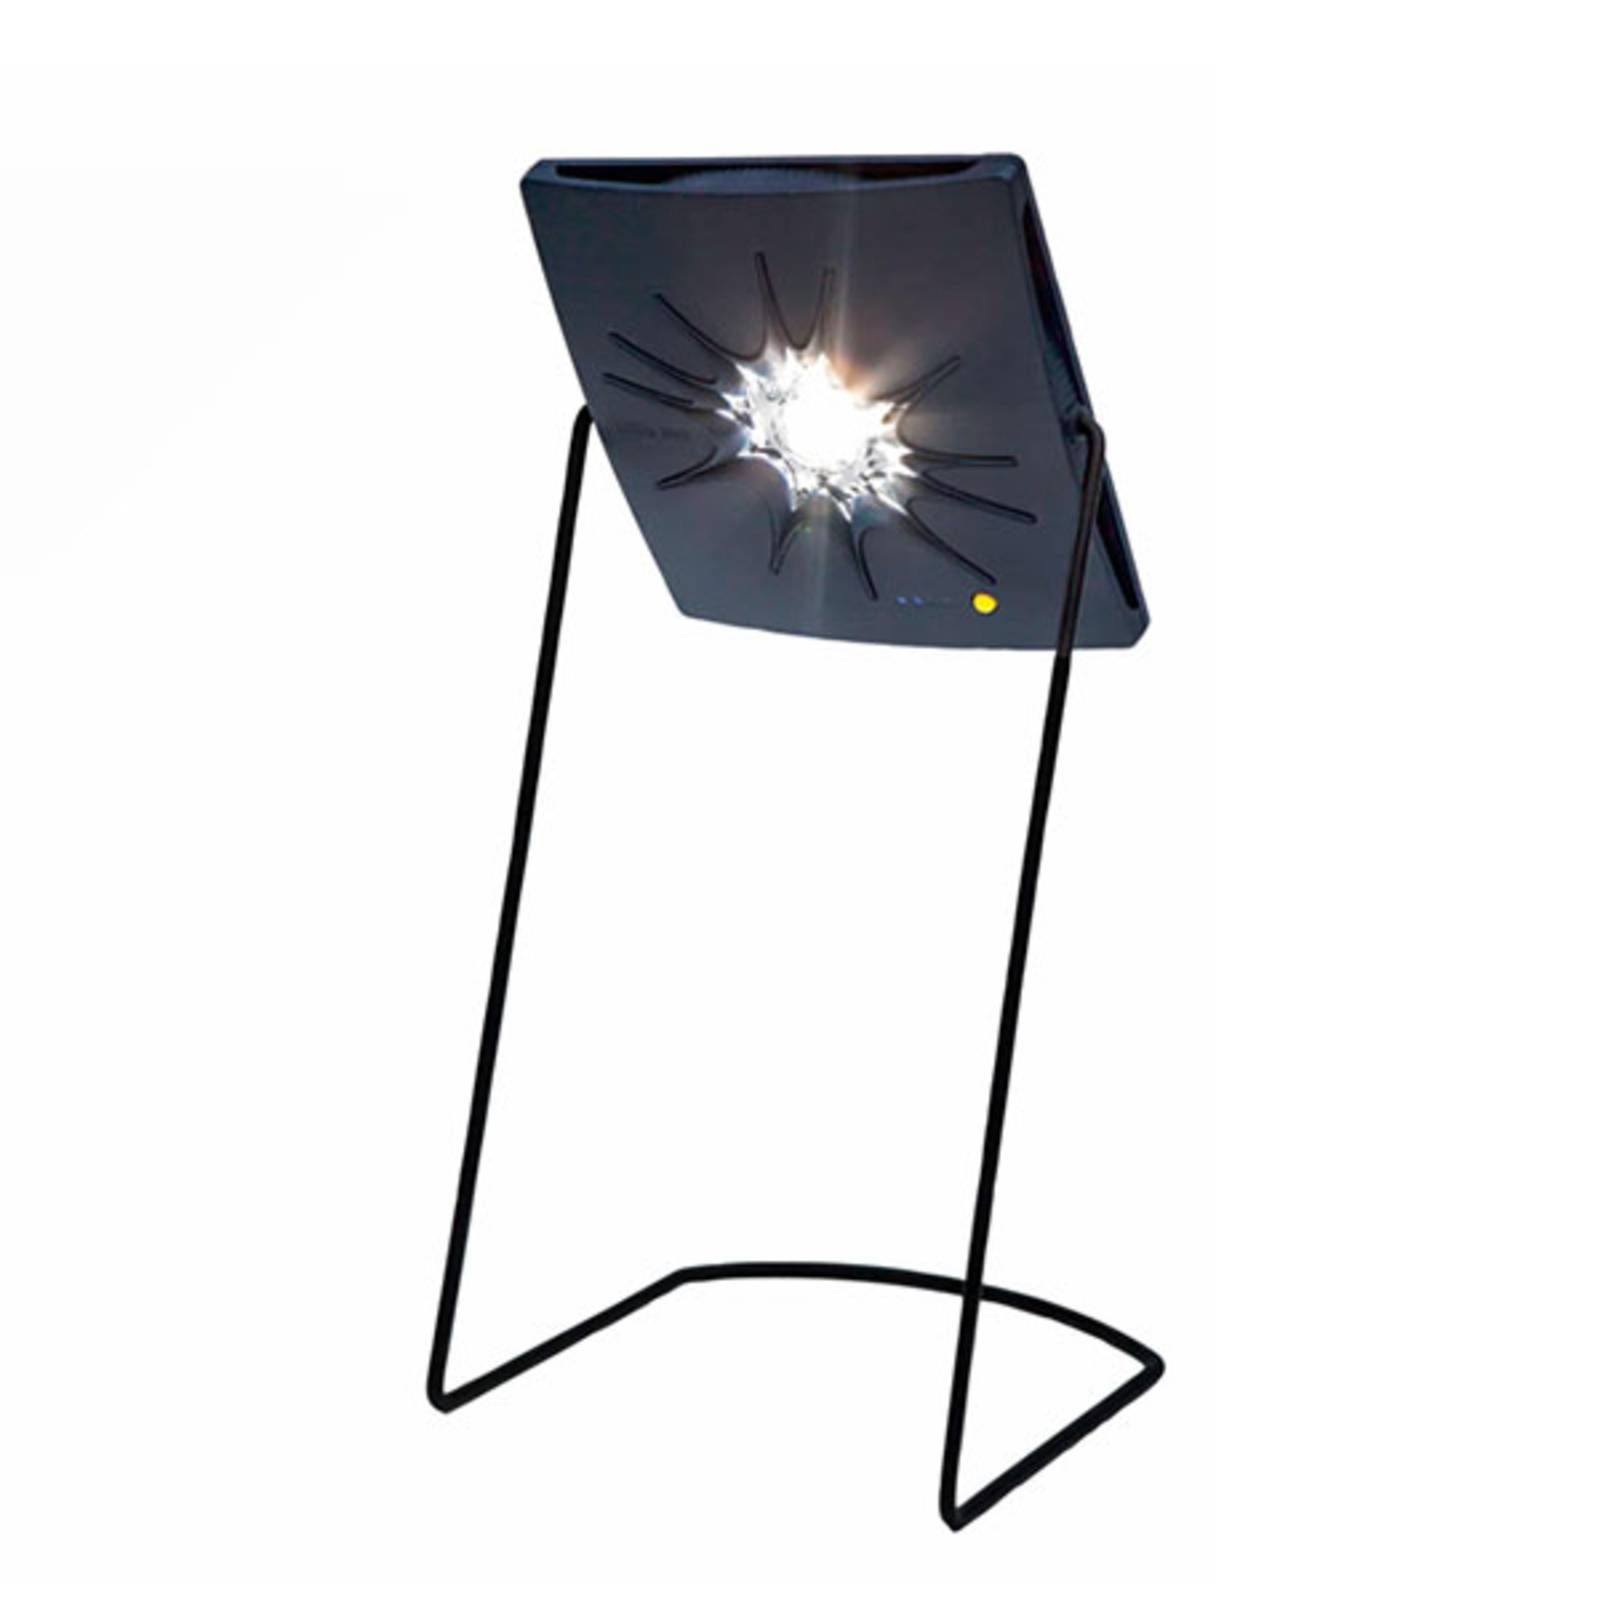 Image of Support pour lampe solaire Little Sun Charge 4260312640042